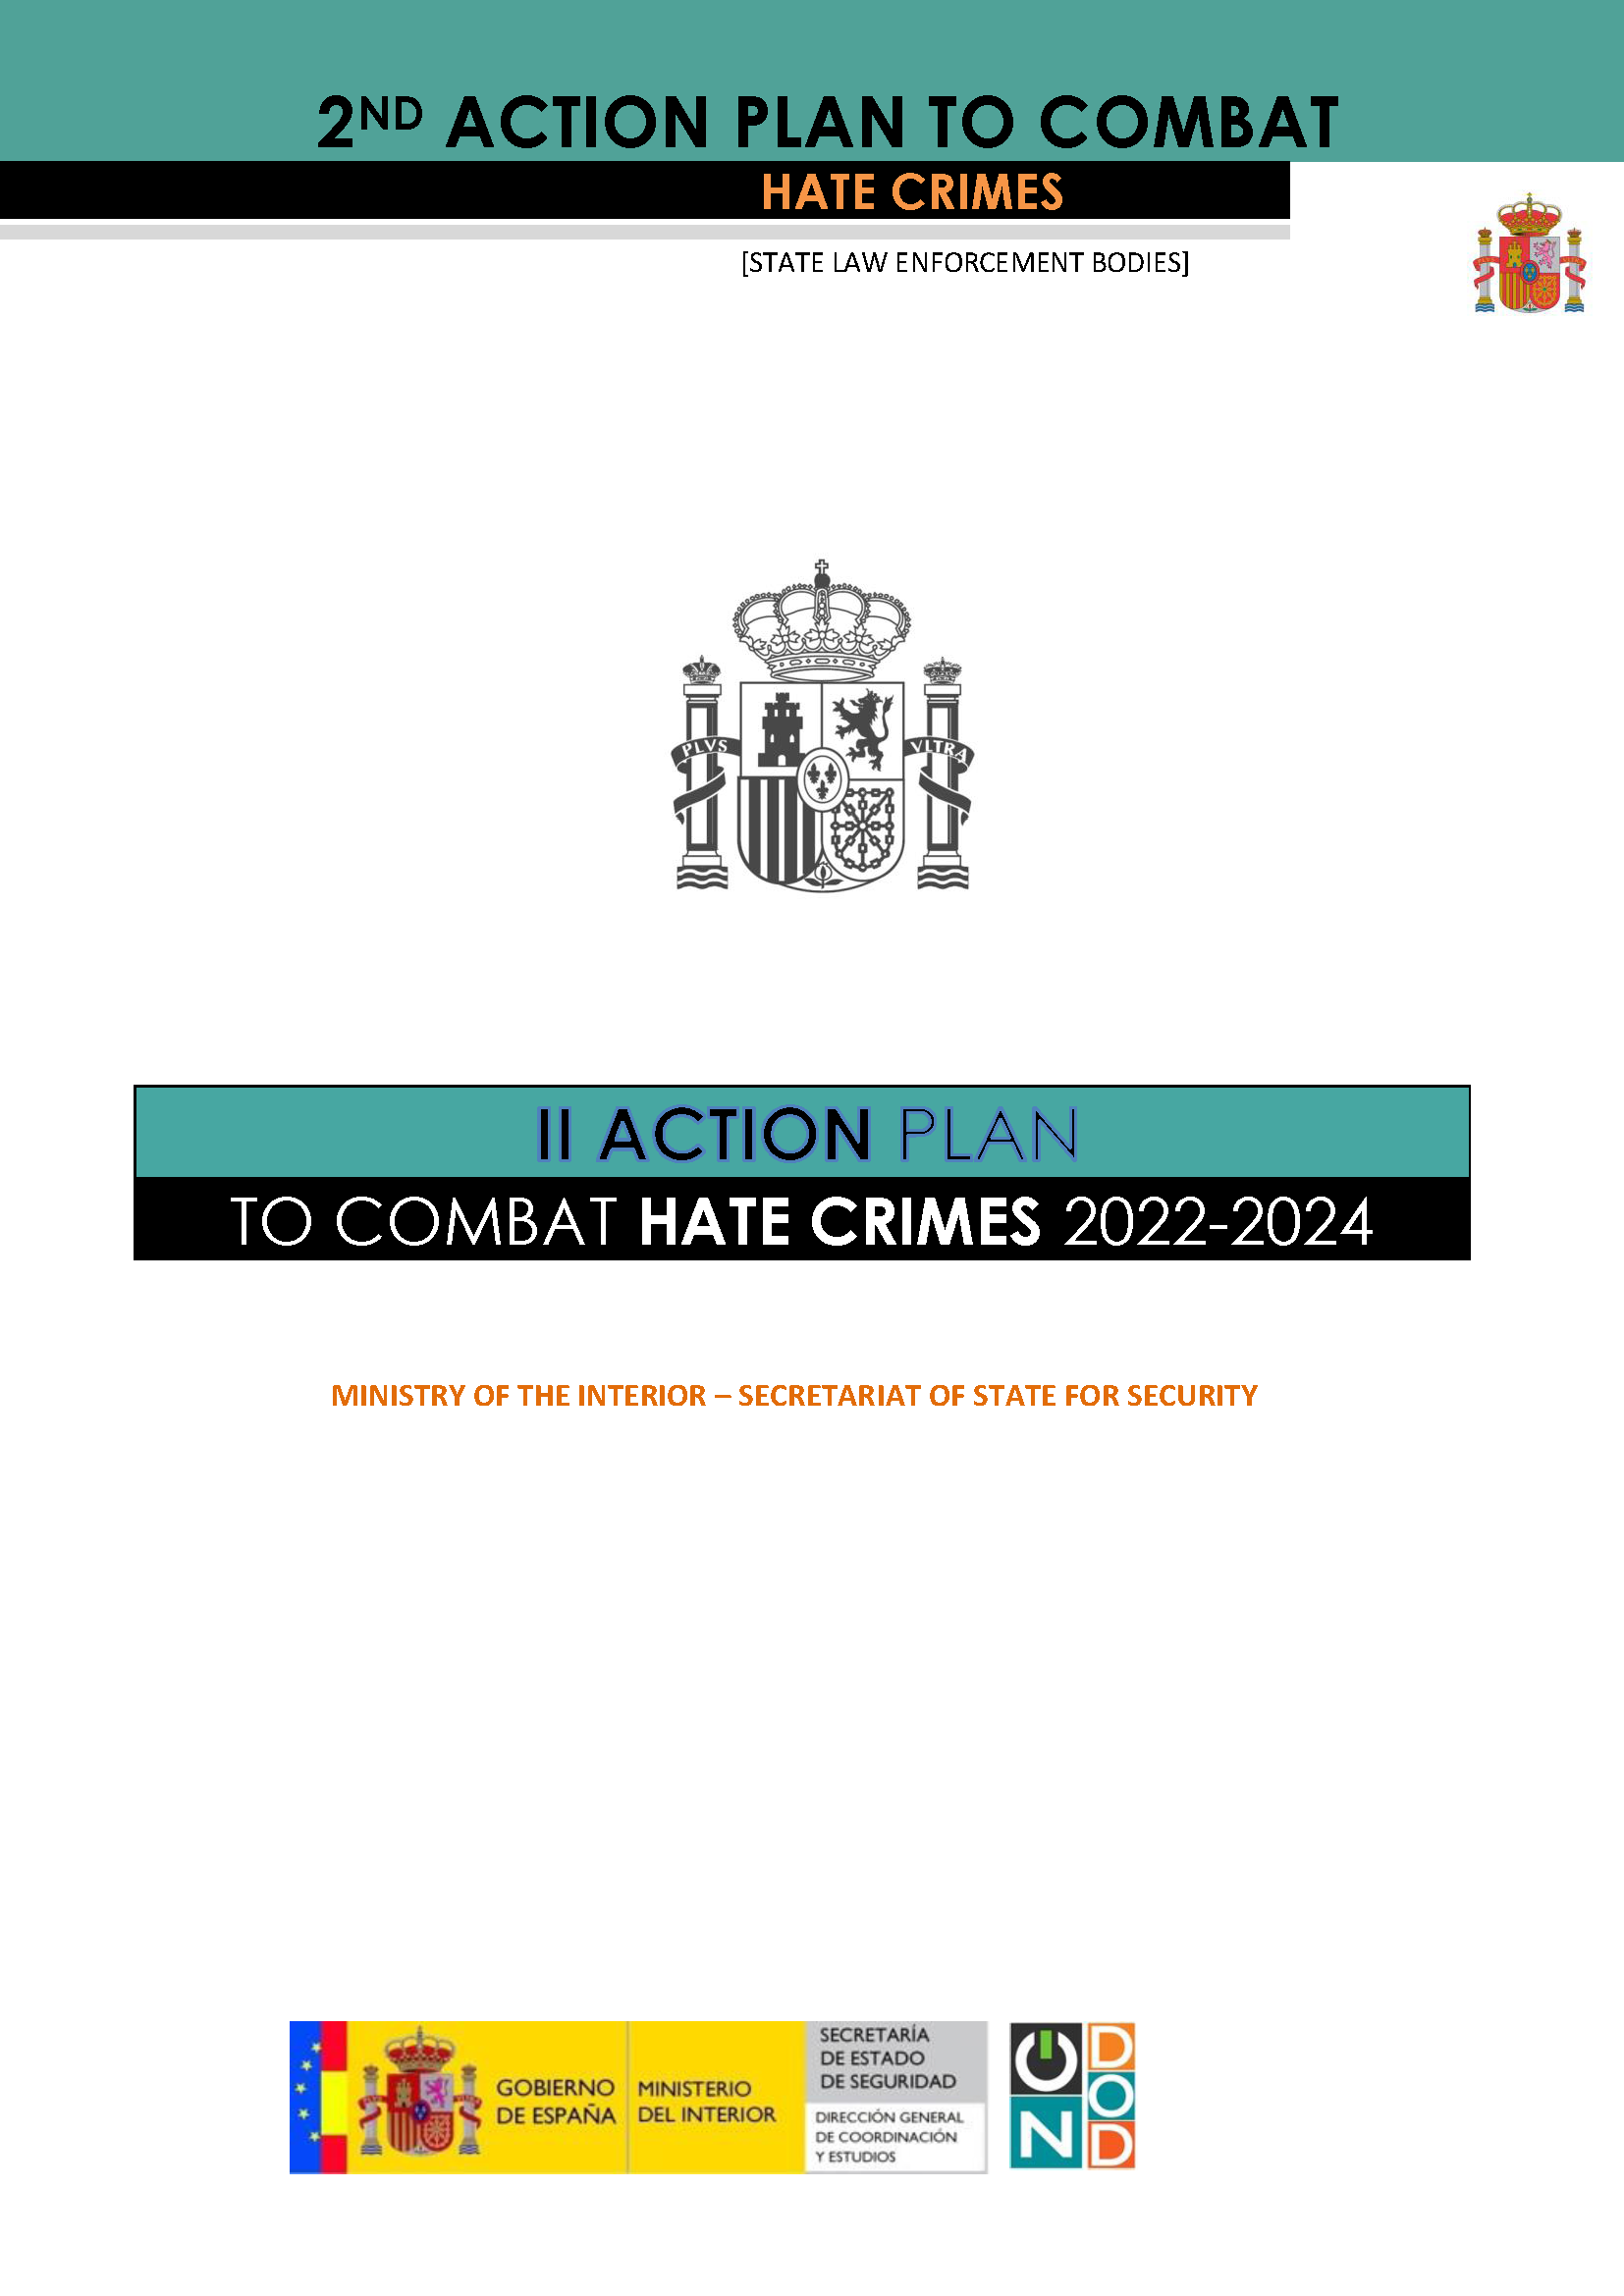 II Action Plan to Combat Hate Crimes 2022-2024